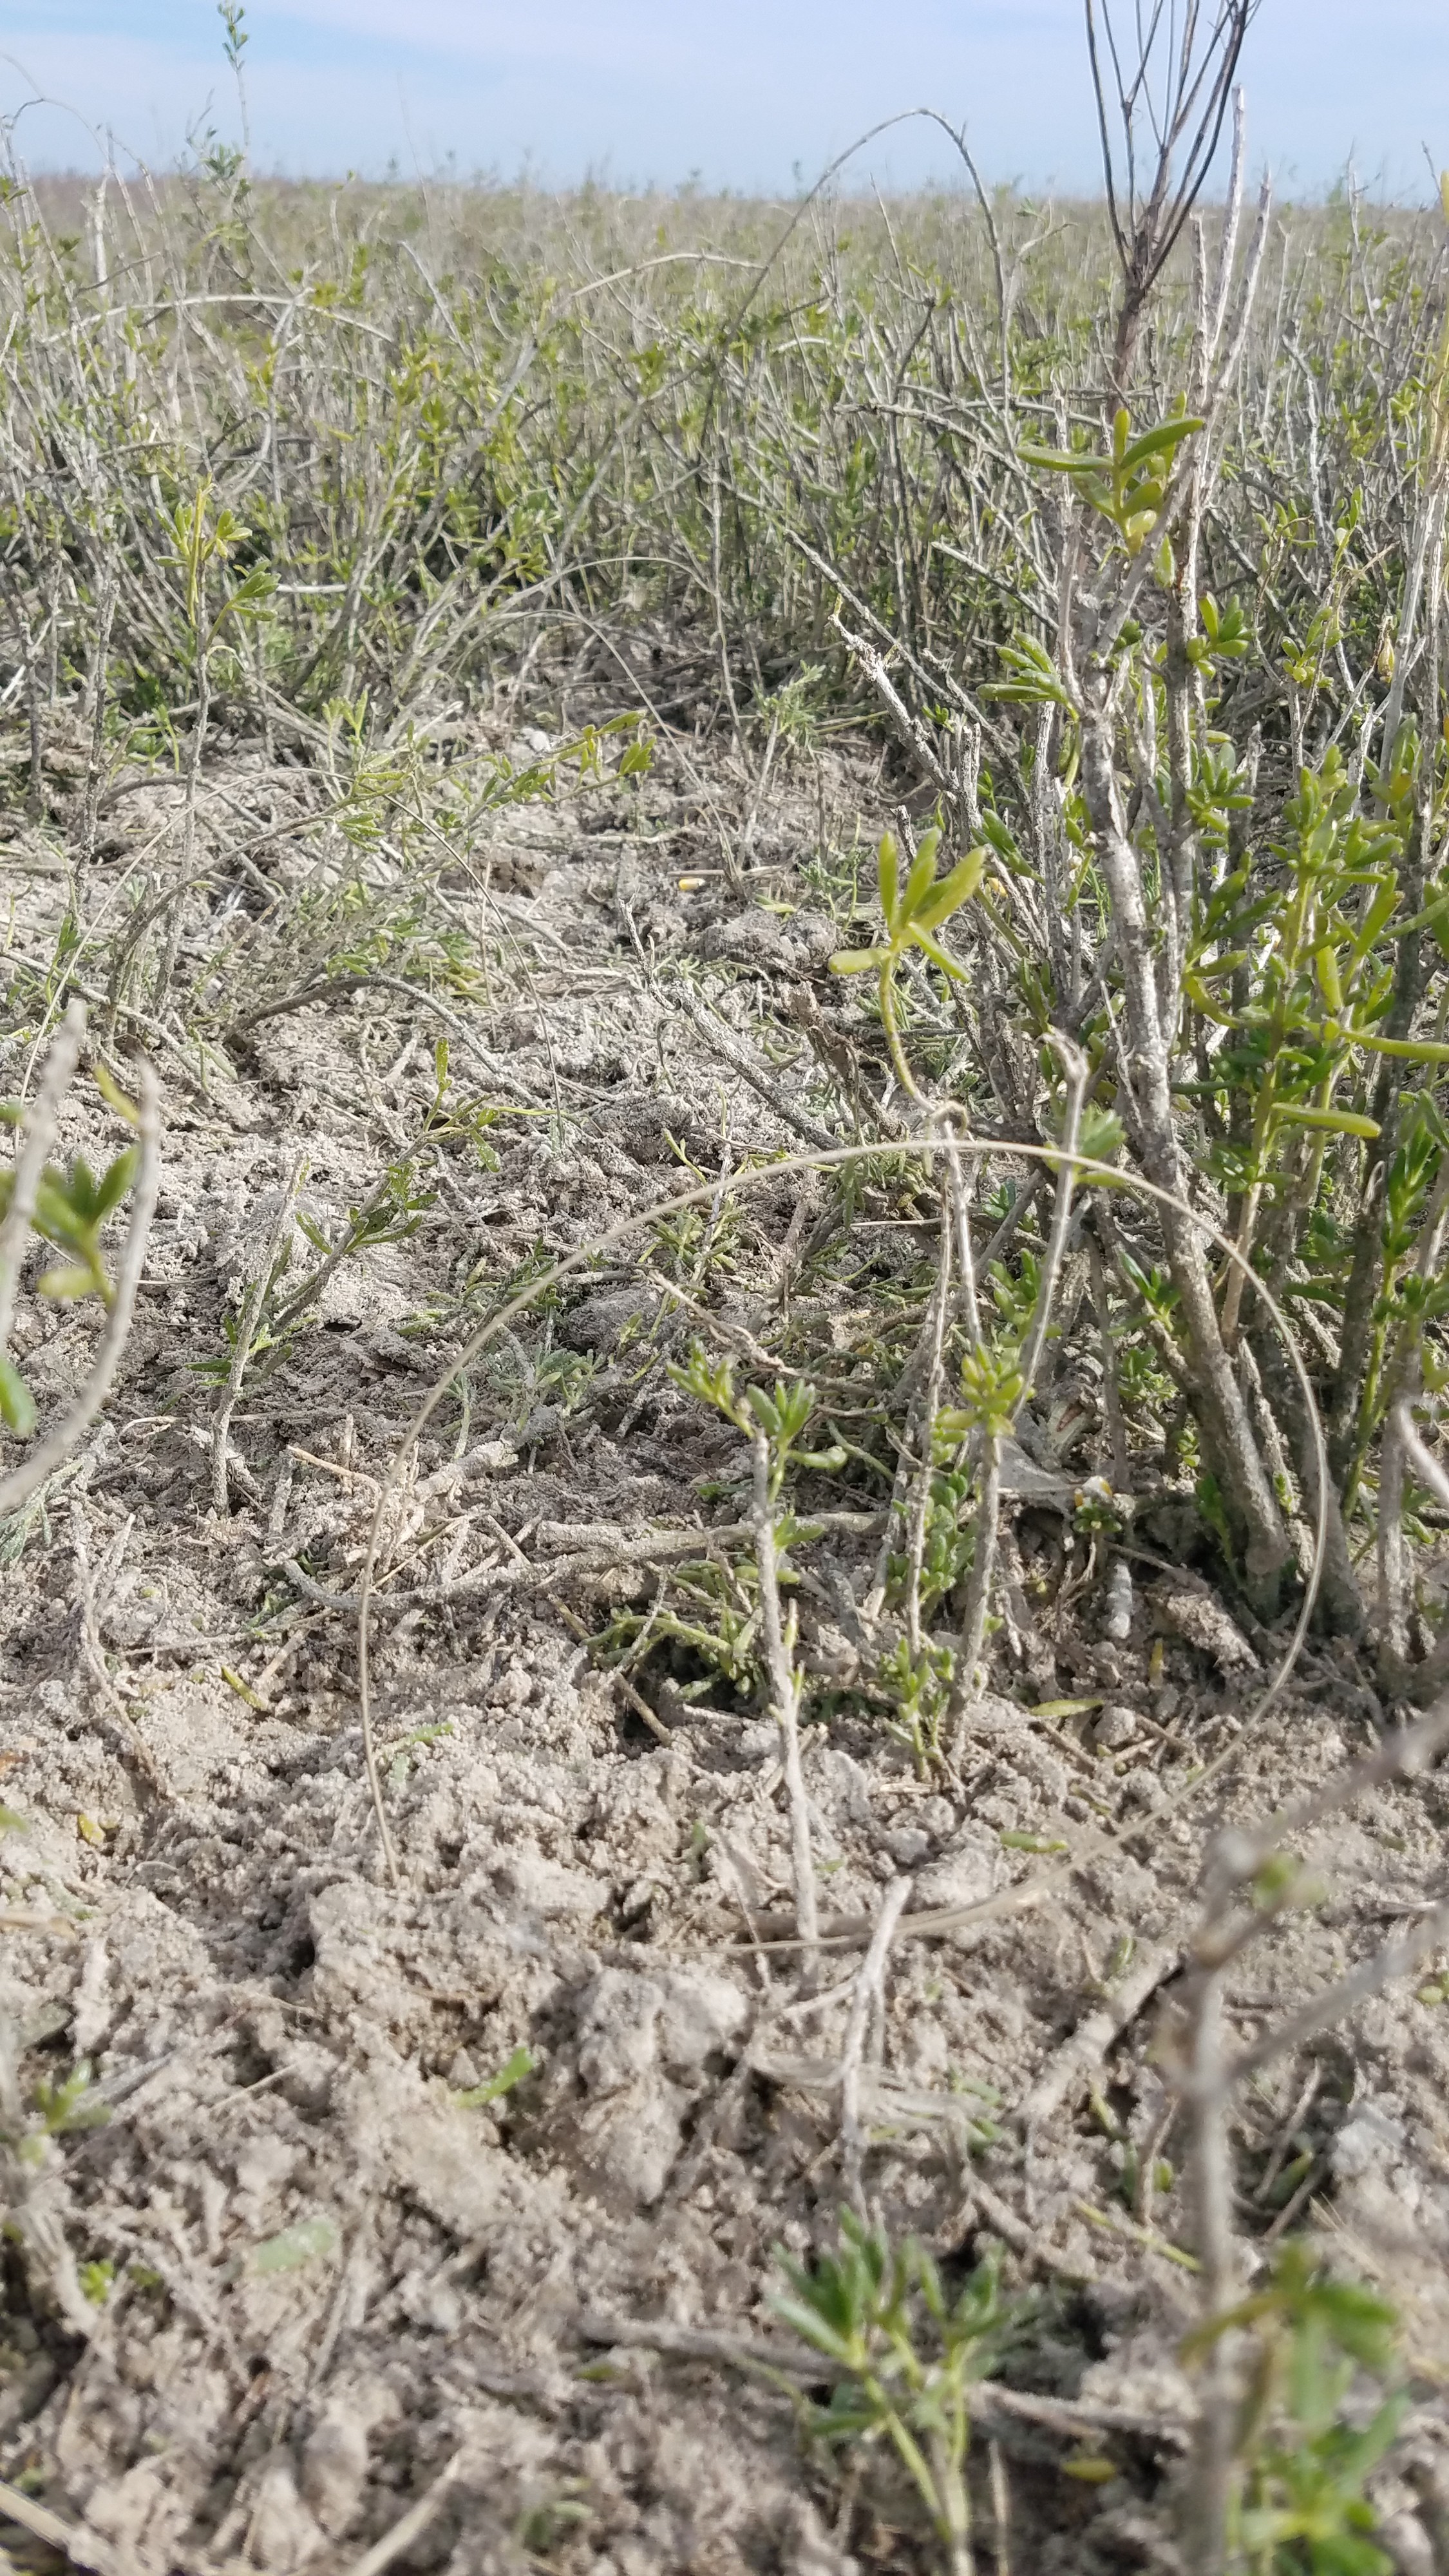 A series of leg snare traps are shown in a line in a patch of tall grasses